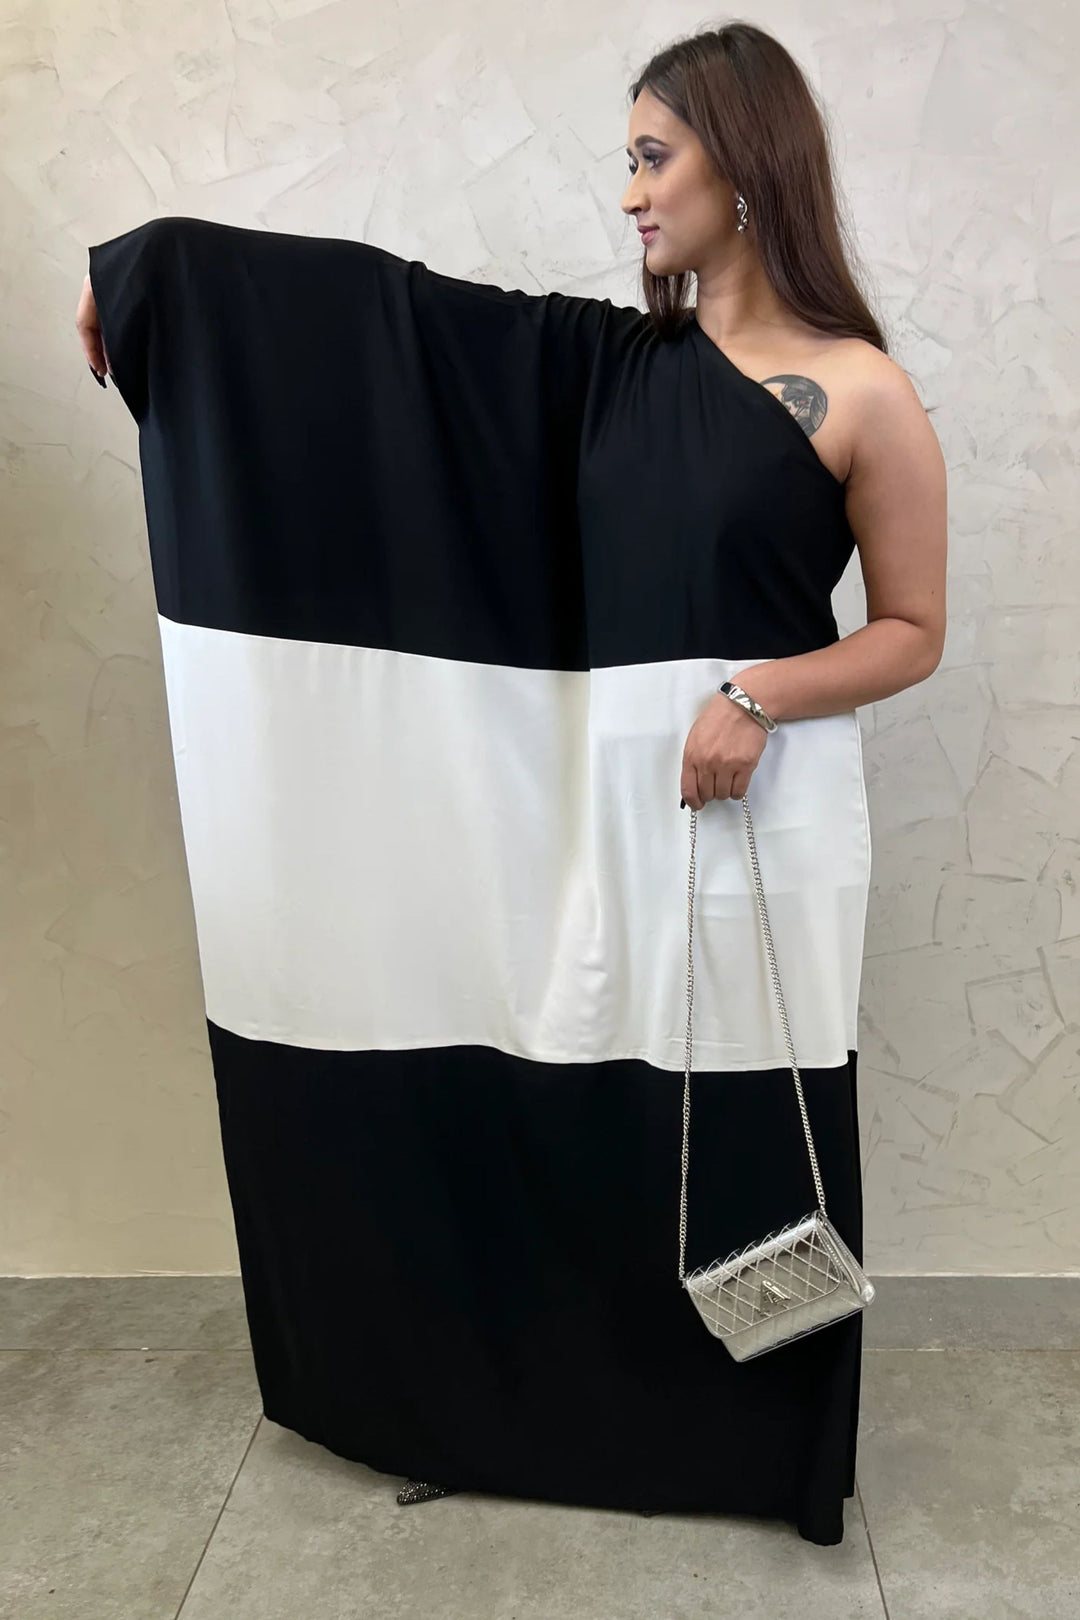 party wear kaftan dress in black and white